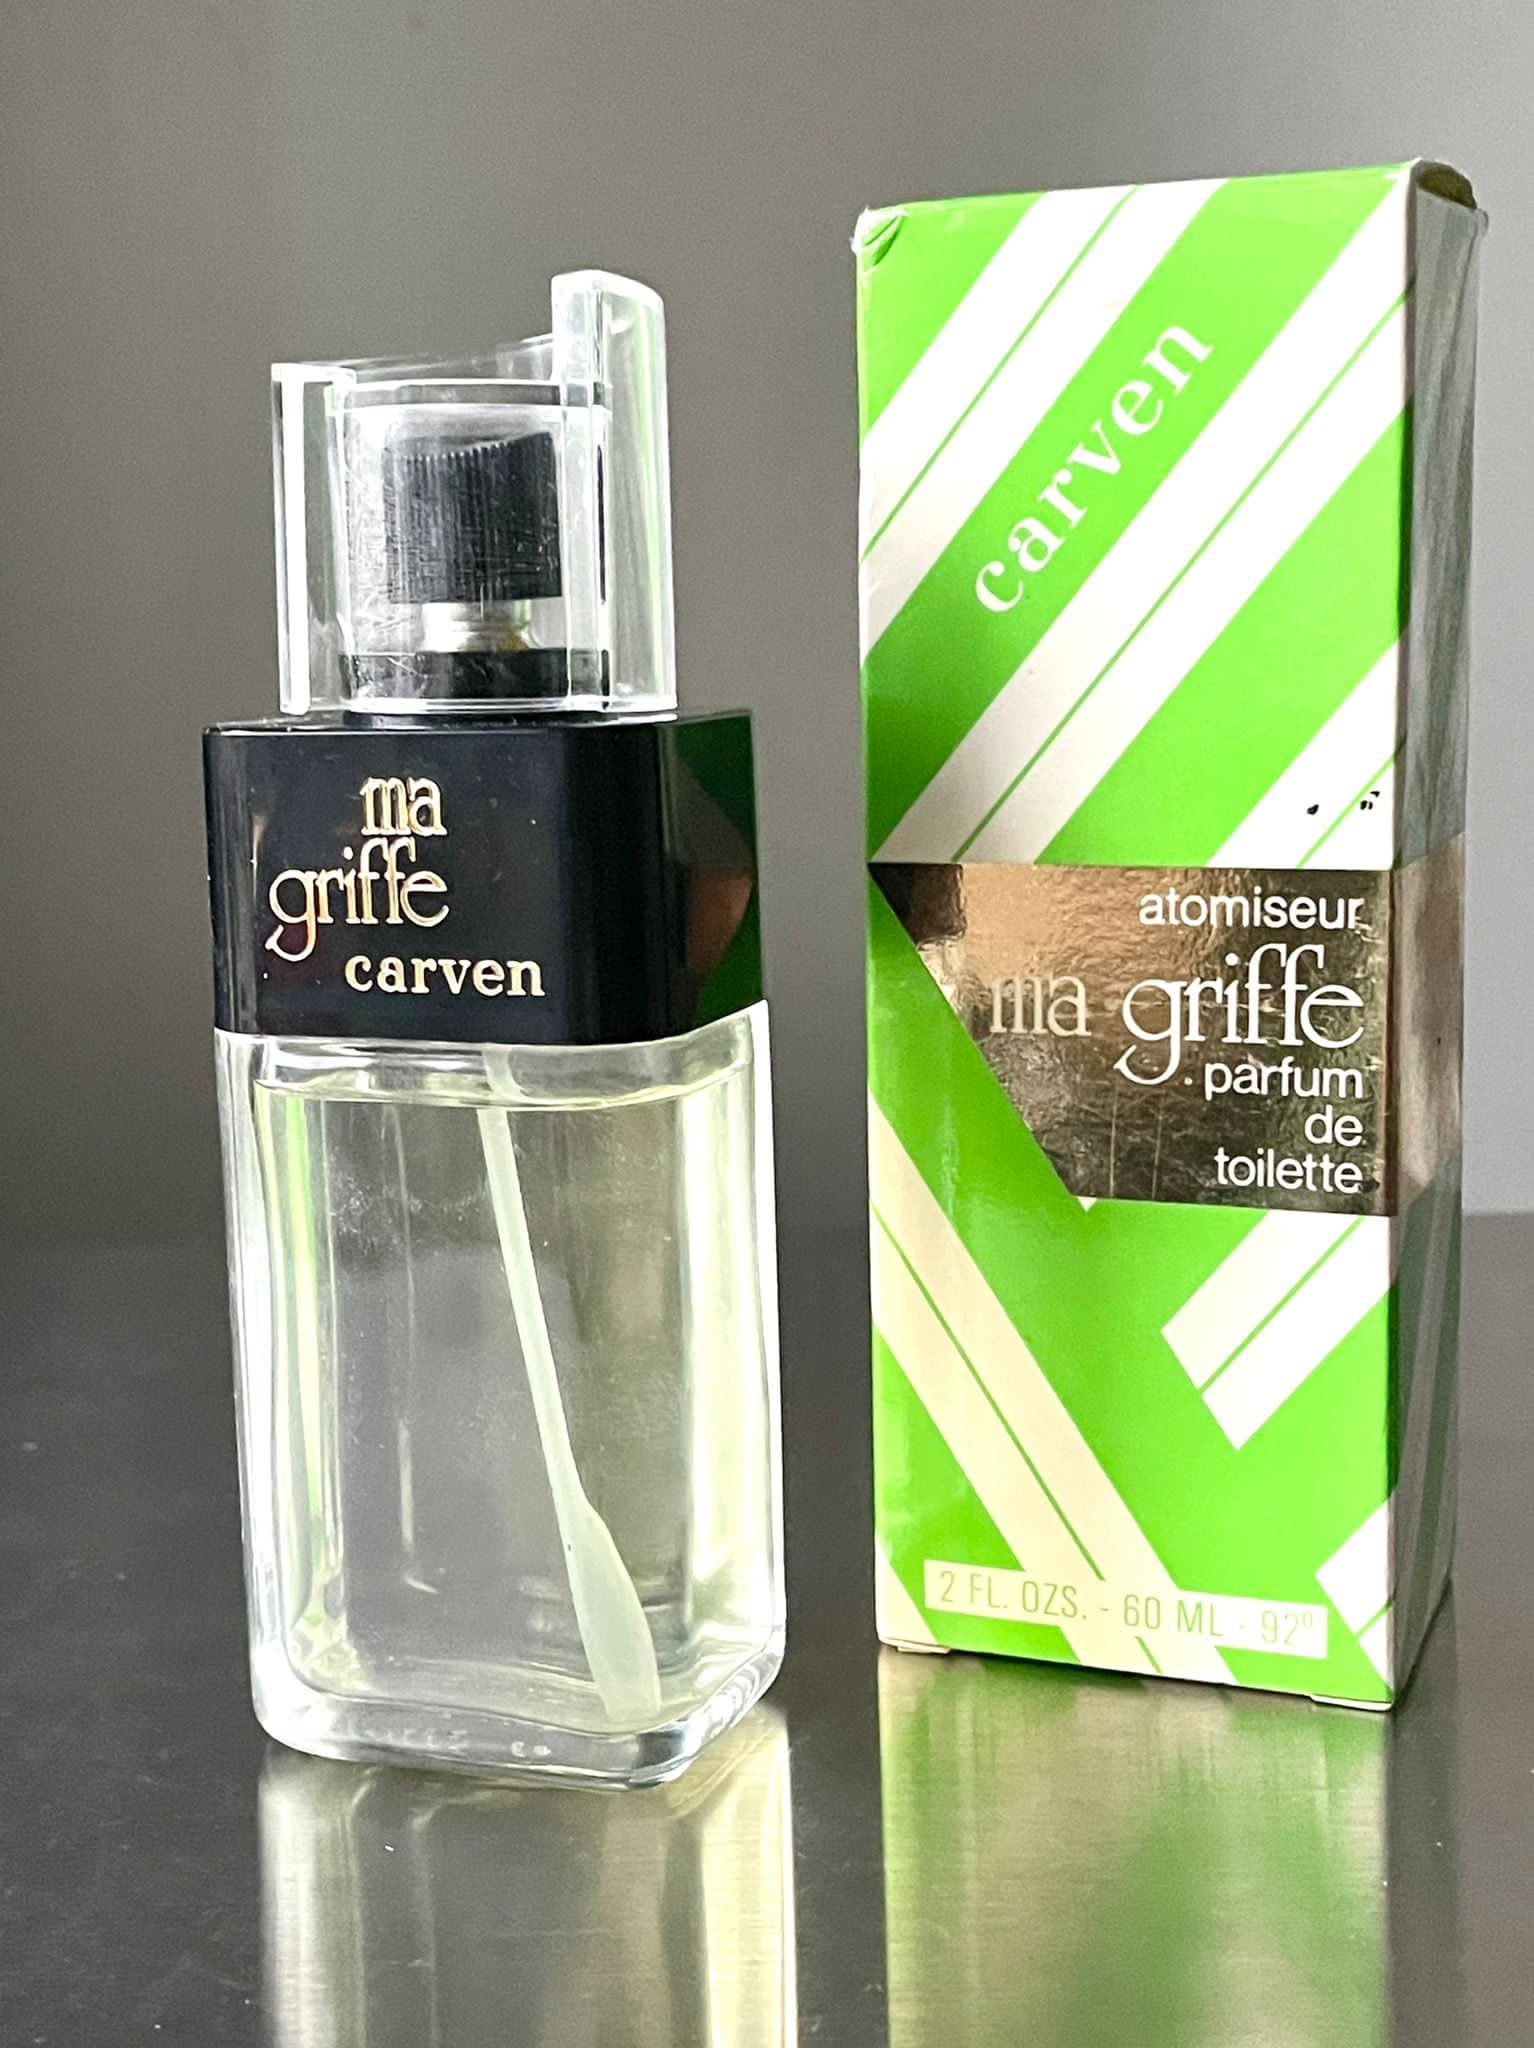 Ma Griffe by Carven, 2 Piece Gift Set for Women 